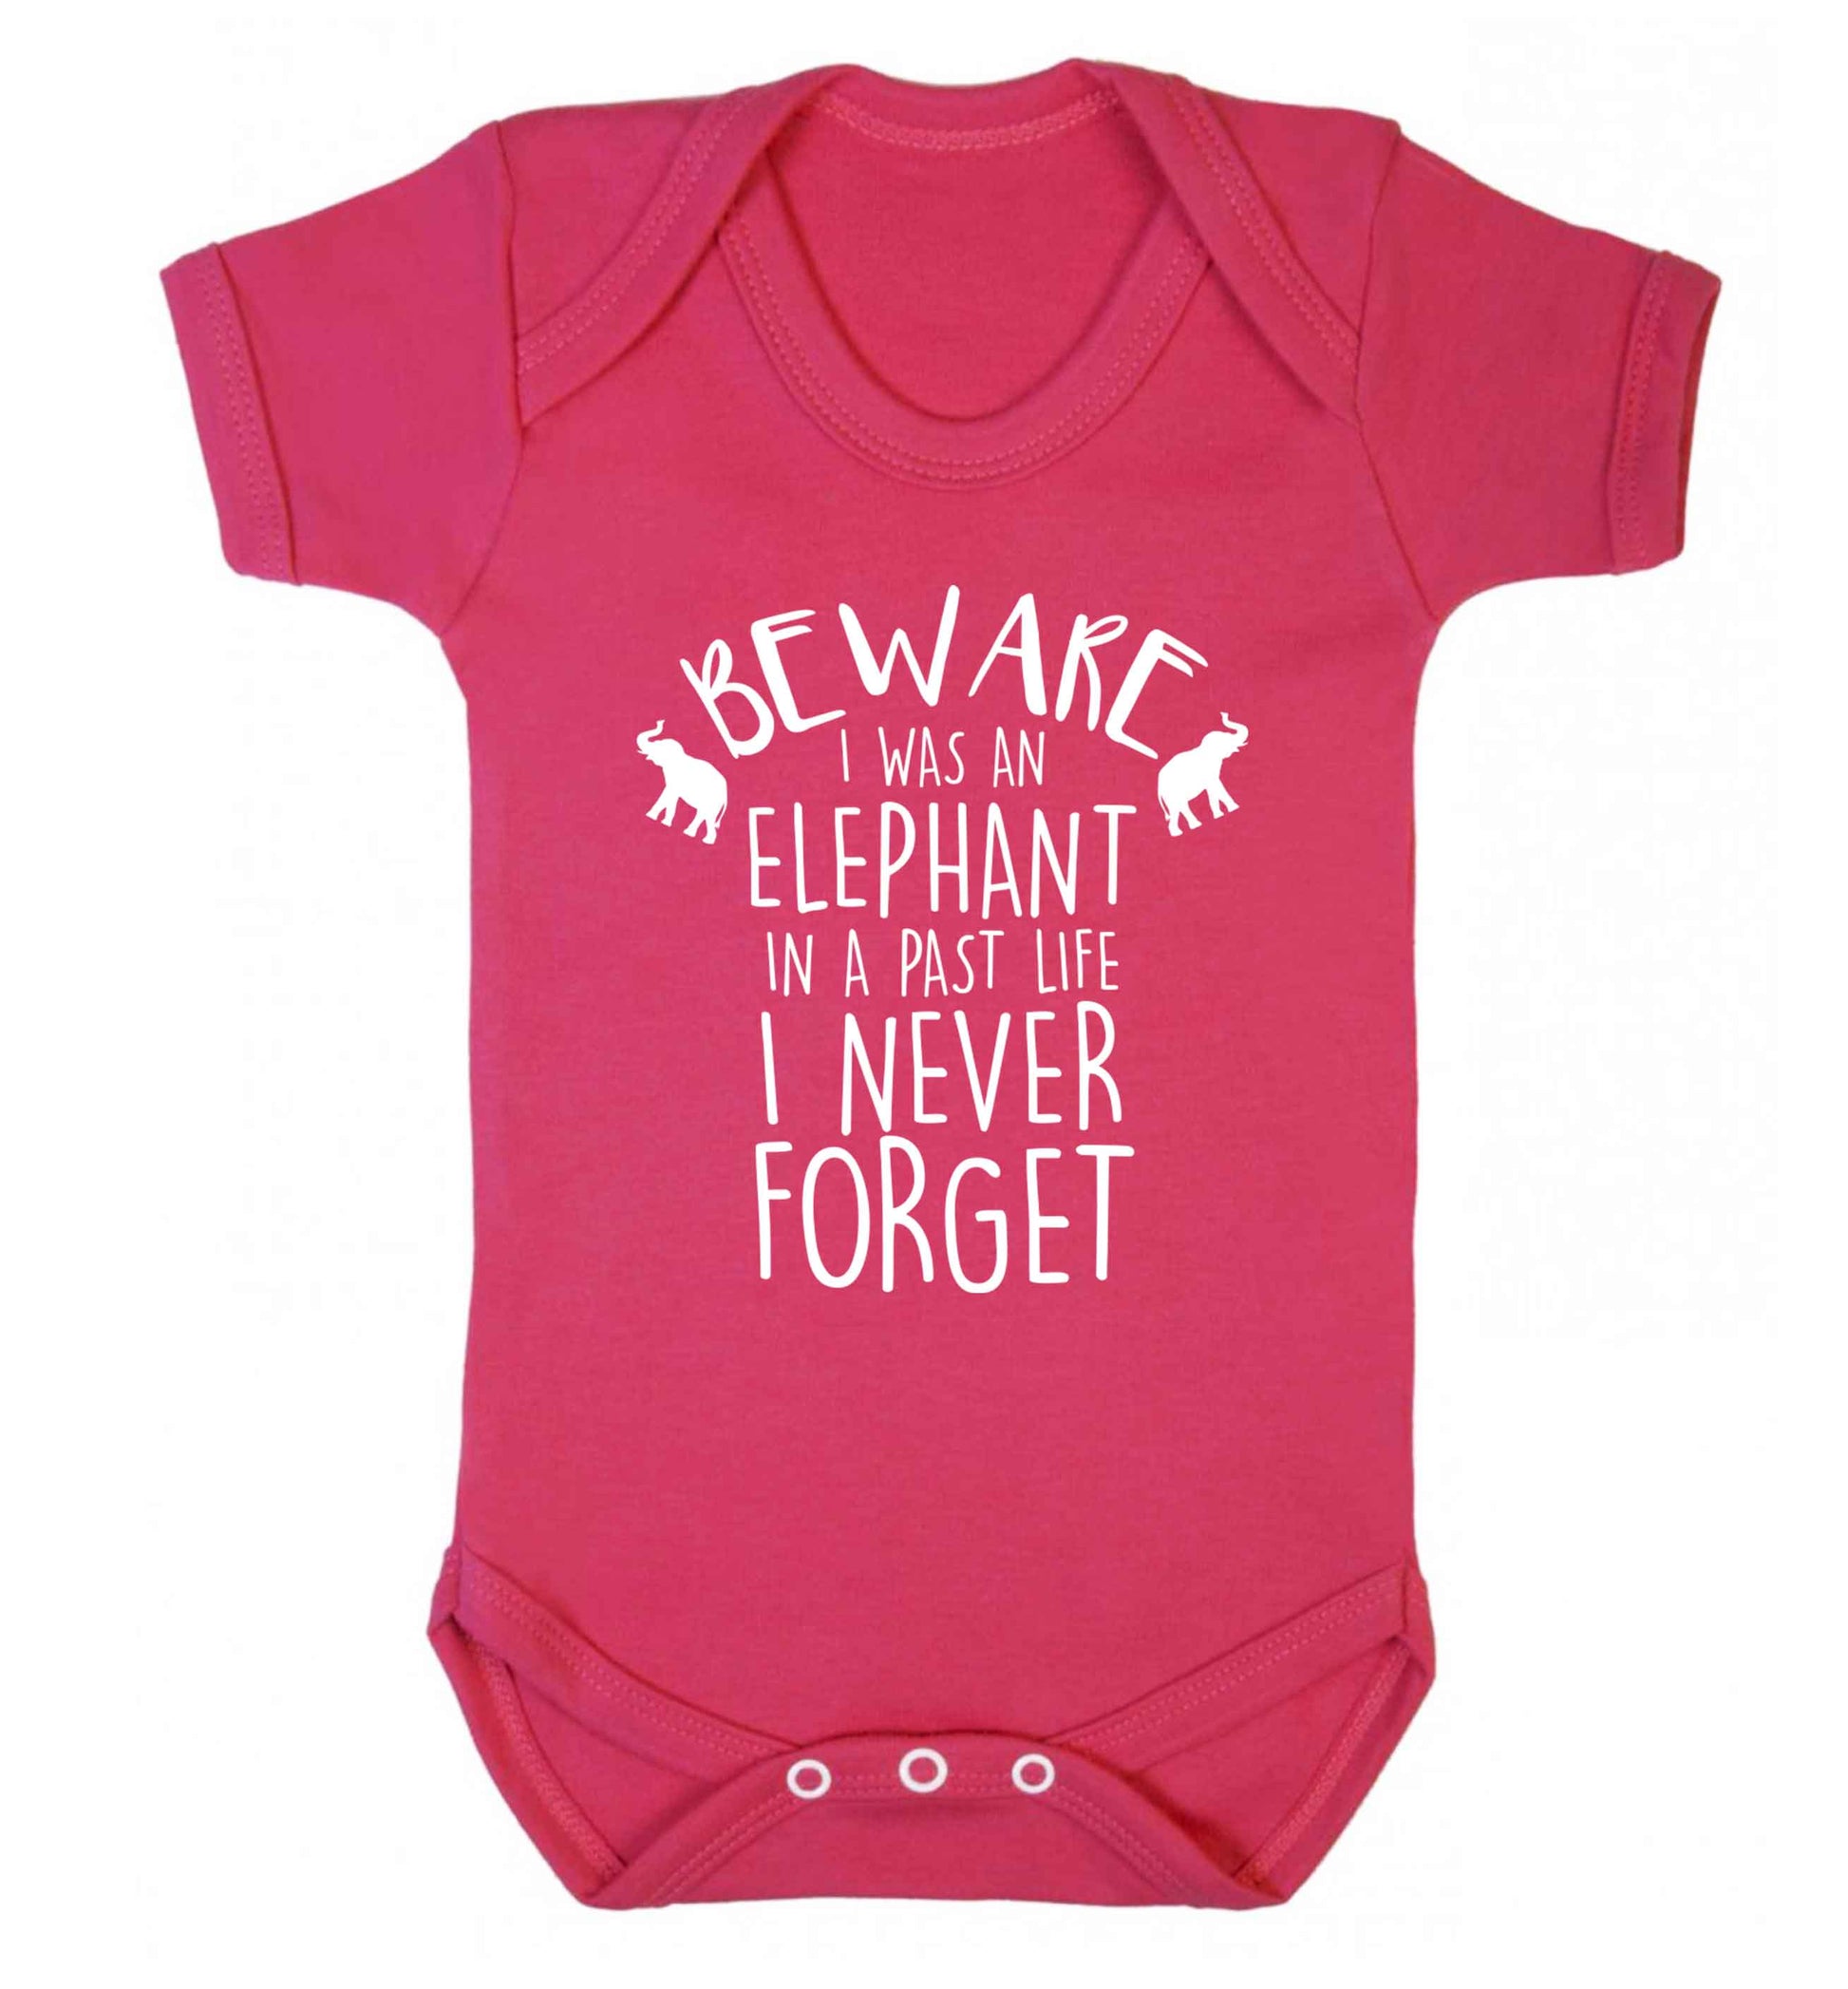 Beware I was an elephant in my past life I never forget Baby Vest dark pink 18-24 months